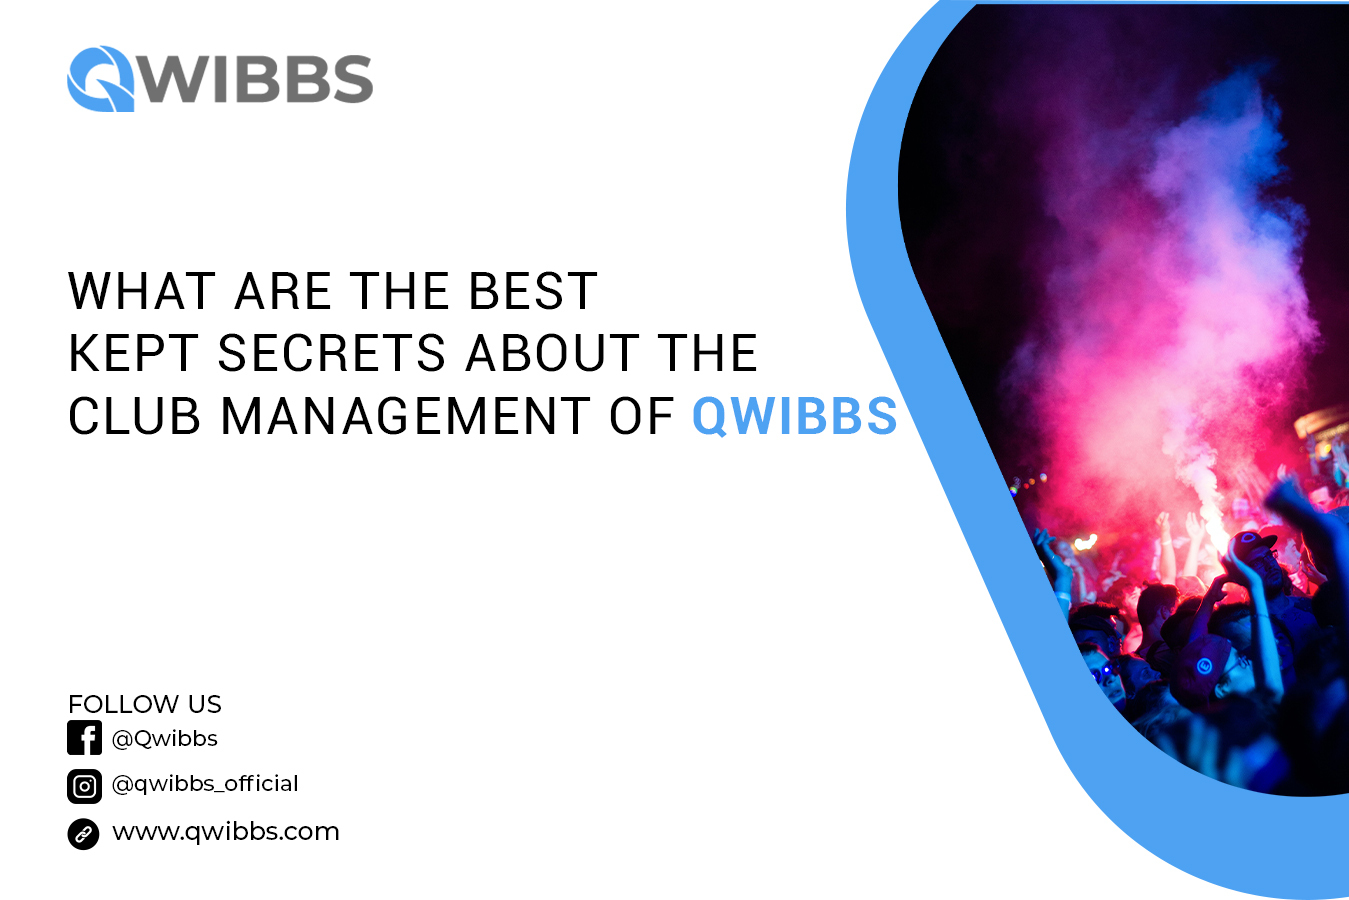 What are the Best Kept Secrets About the Club Management of Qwibbs?